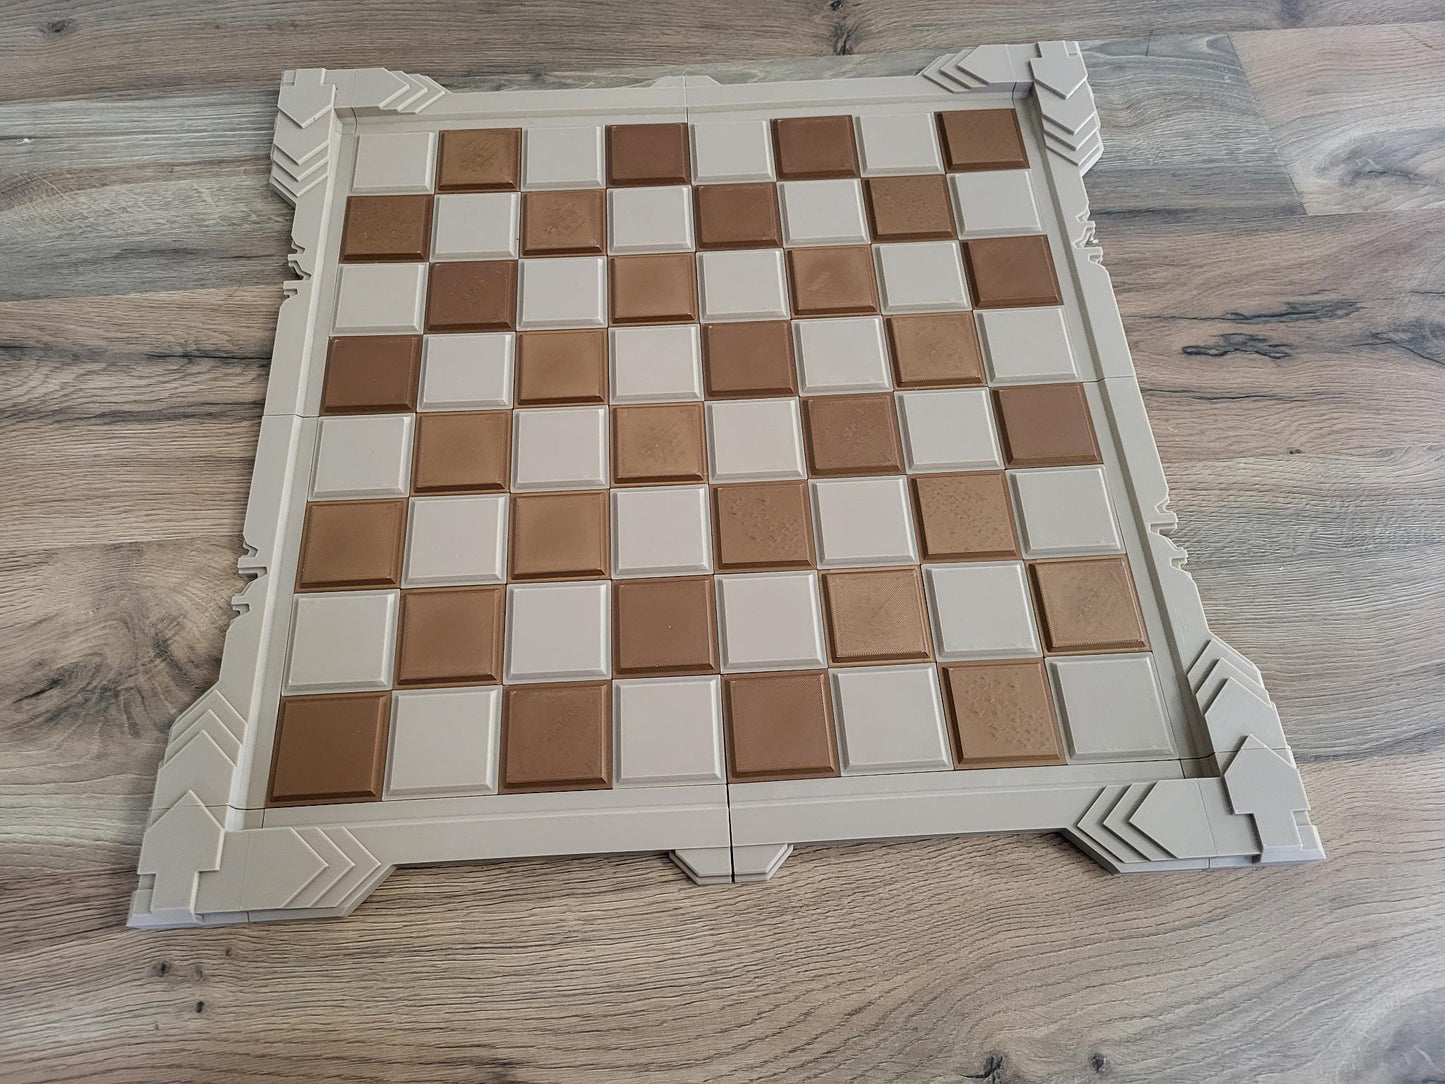 Hexchess 2 Custom Chess Board and Pieces